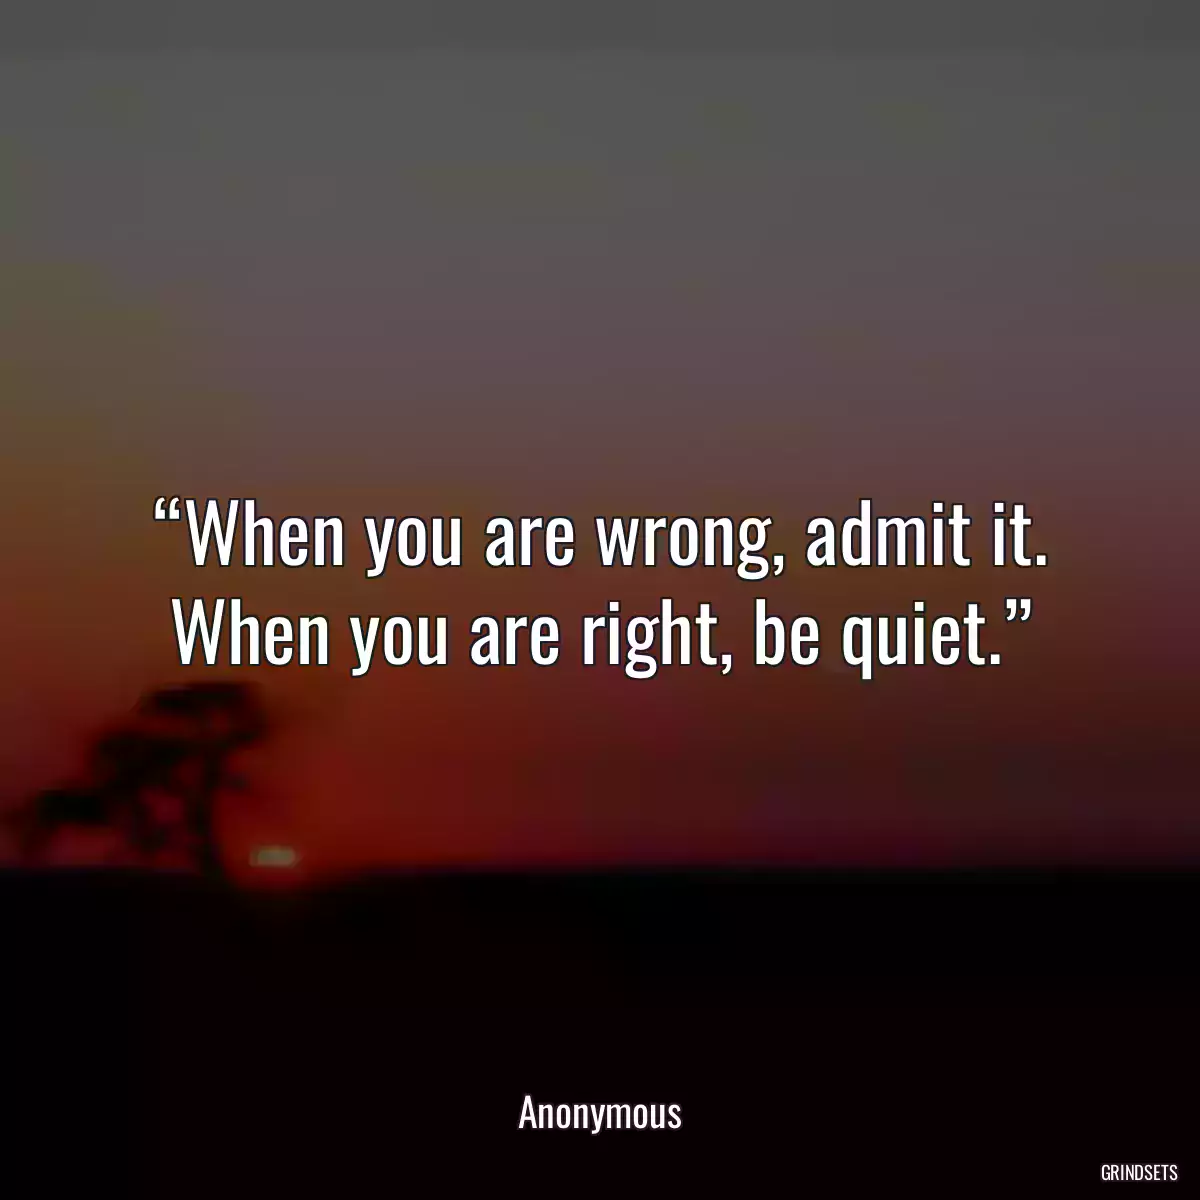 “When you are wrong, admit it. When you are right, be quiet.”